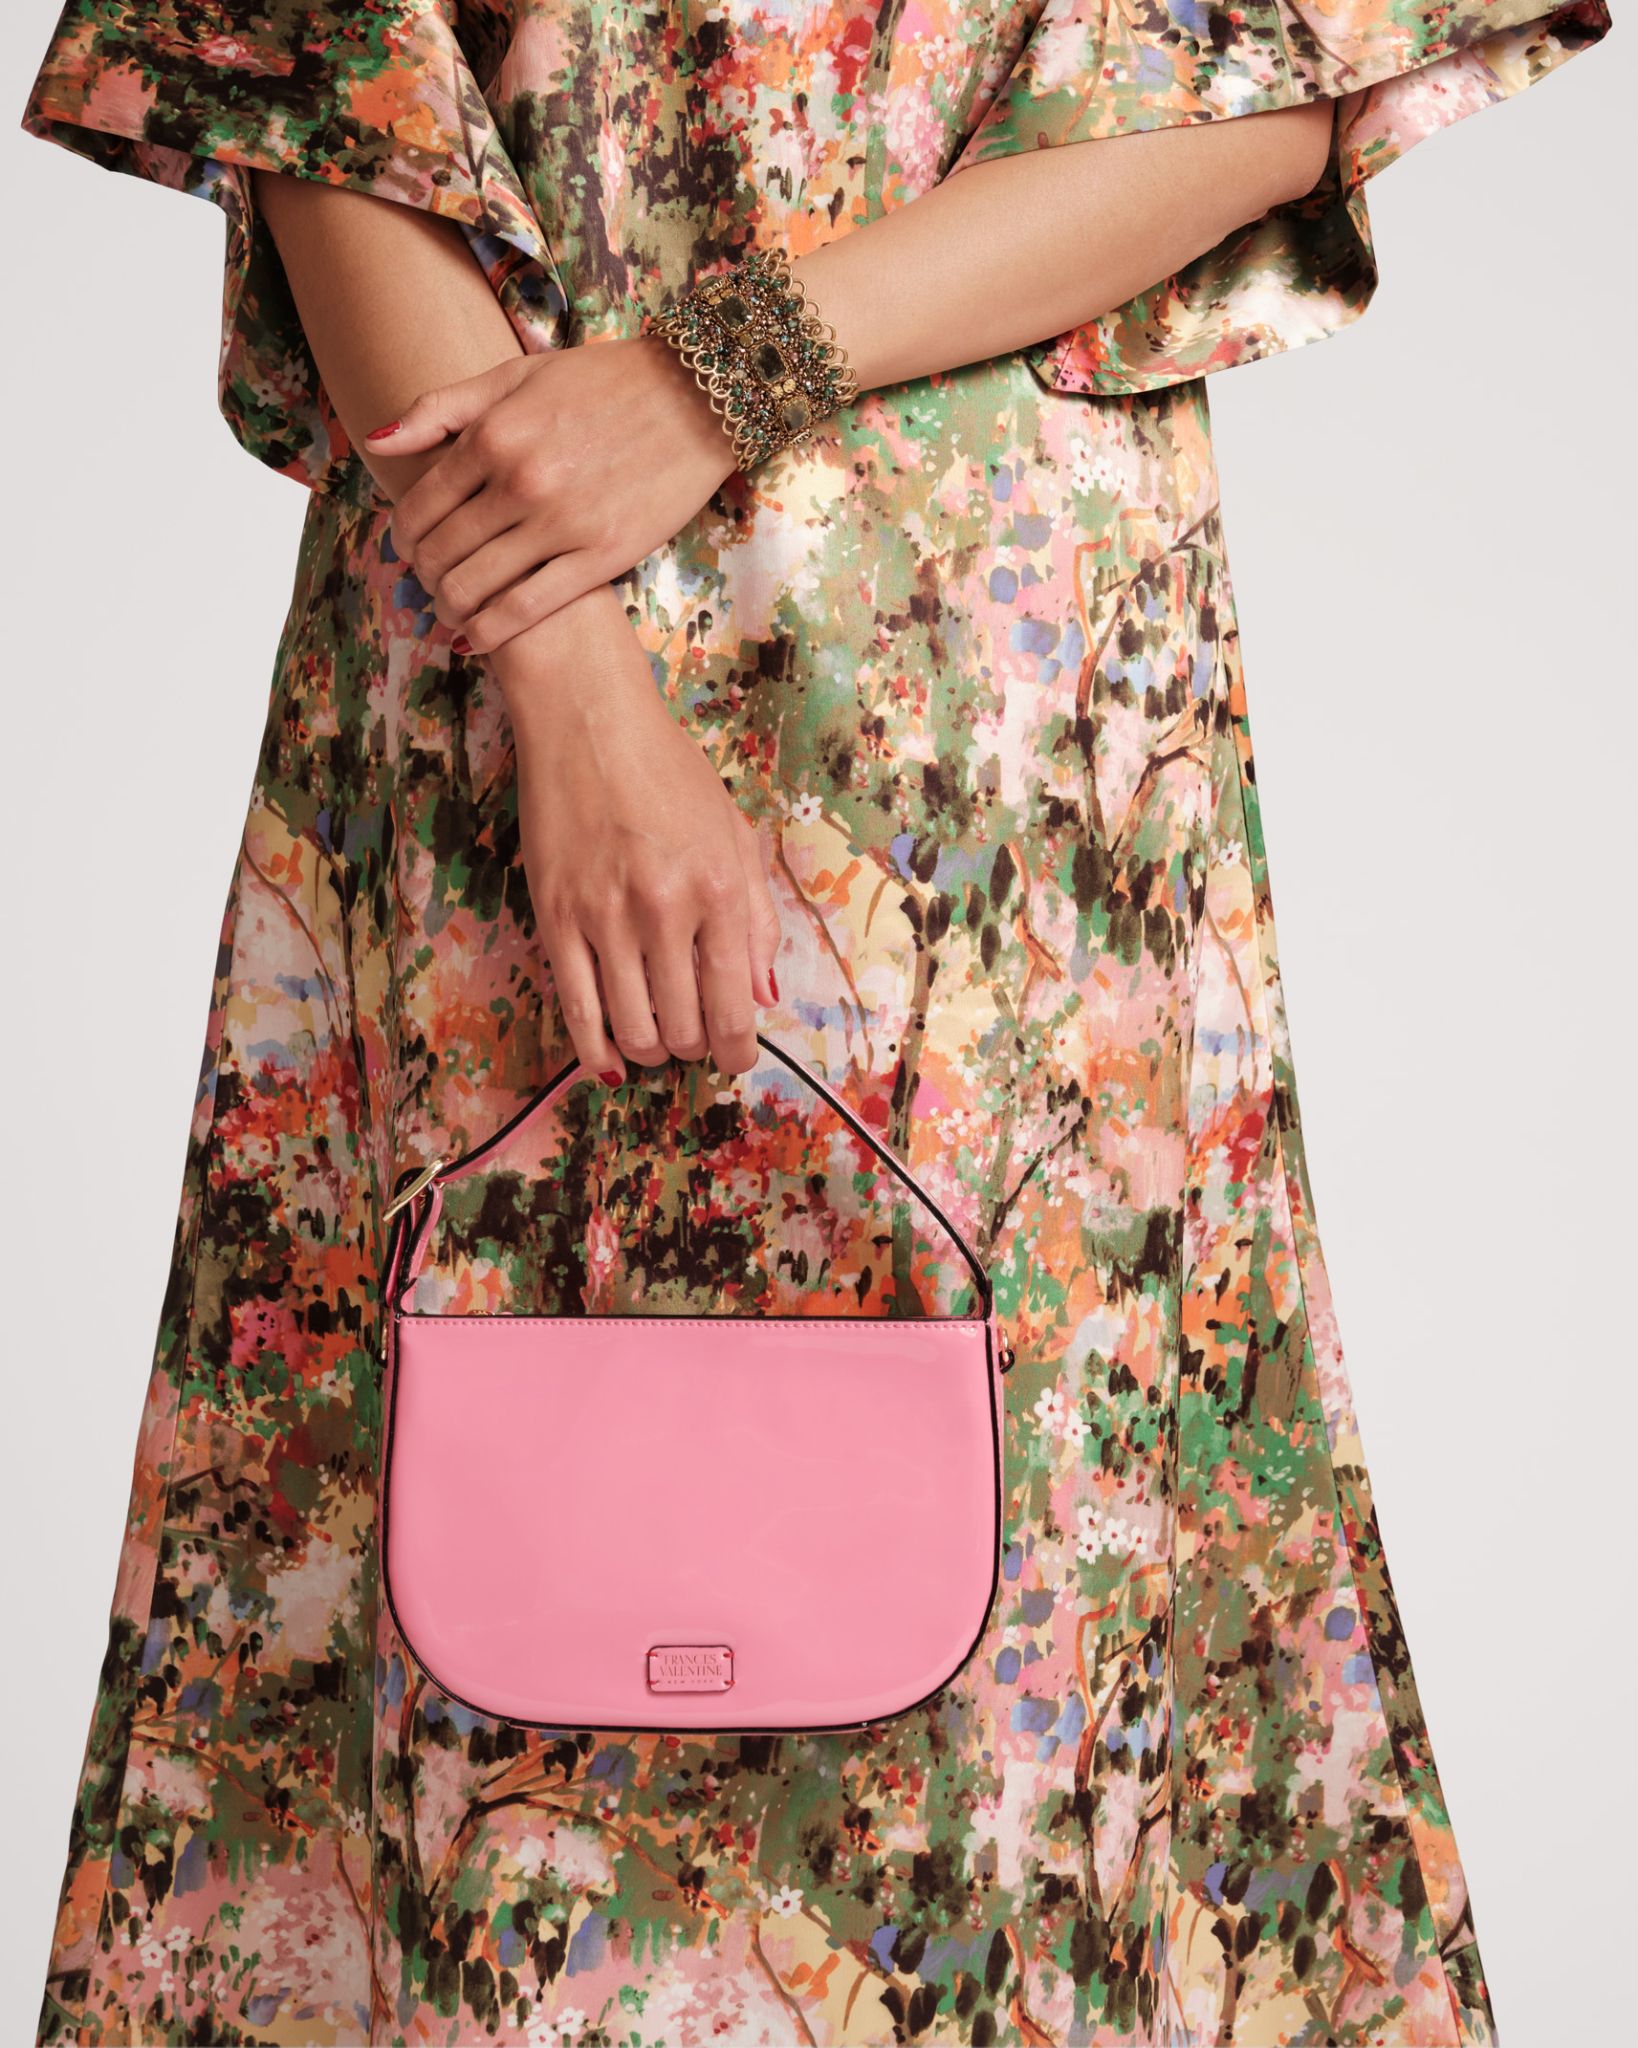 Woman in patterned dress holding a small pink bag.